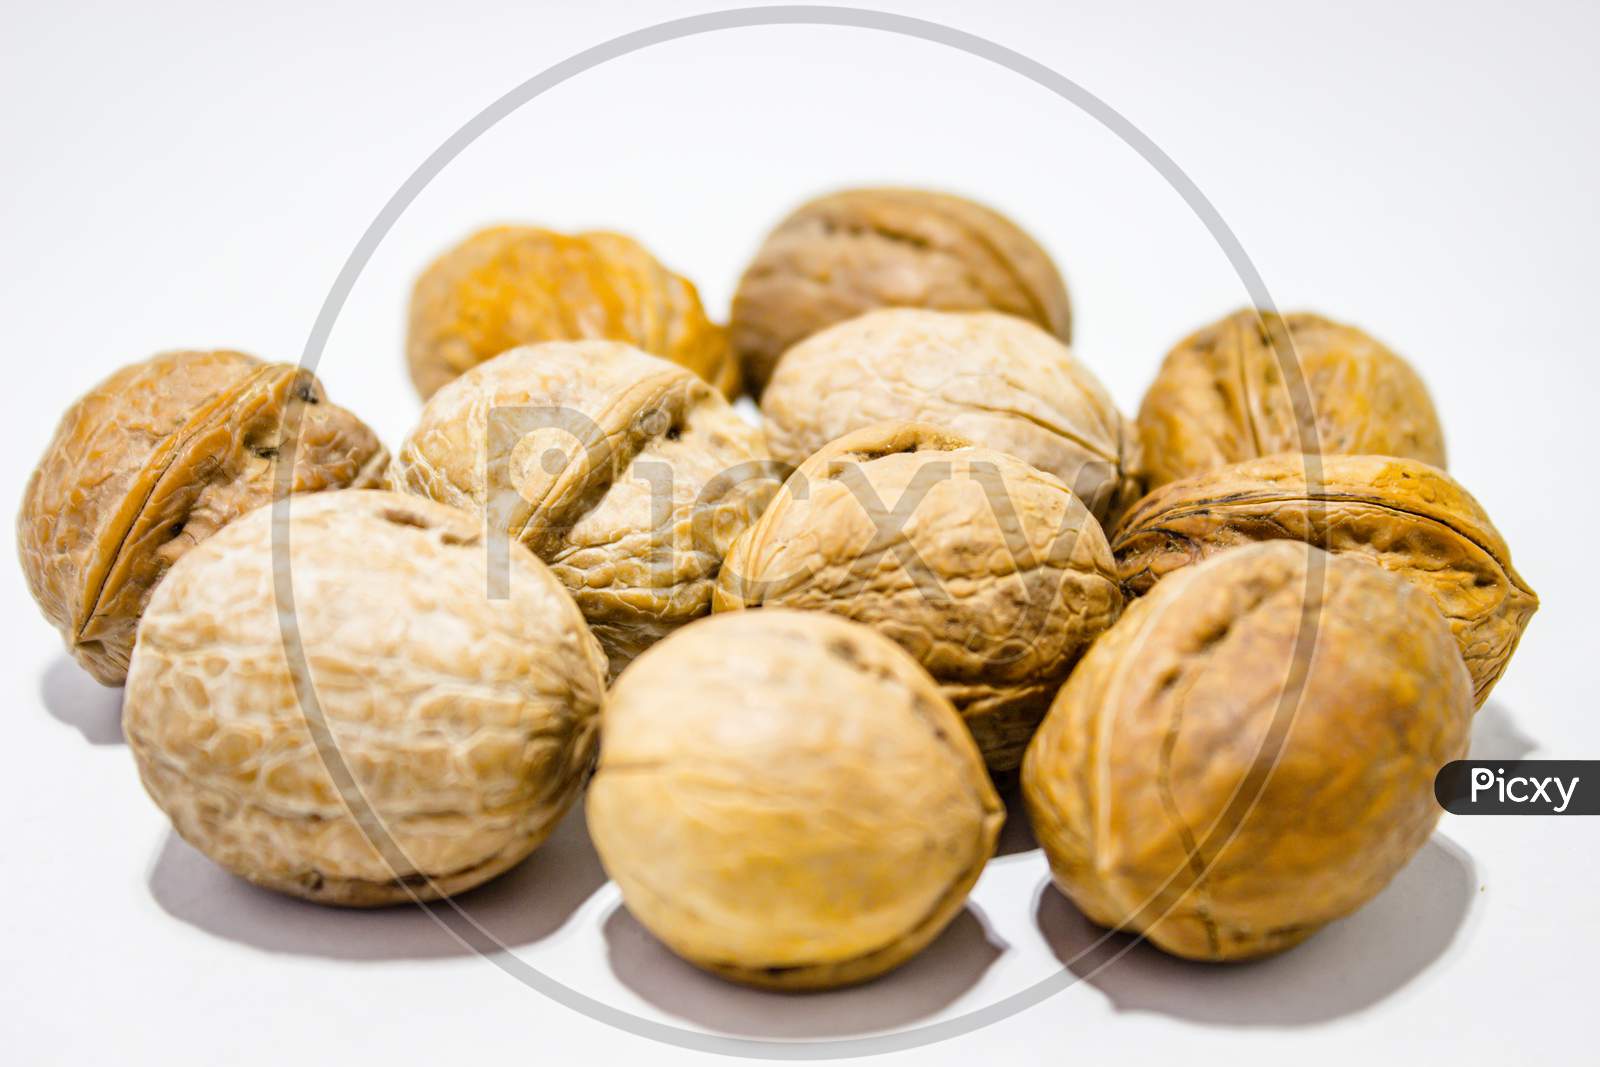 A picture of dry walnuts